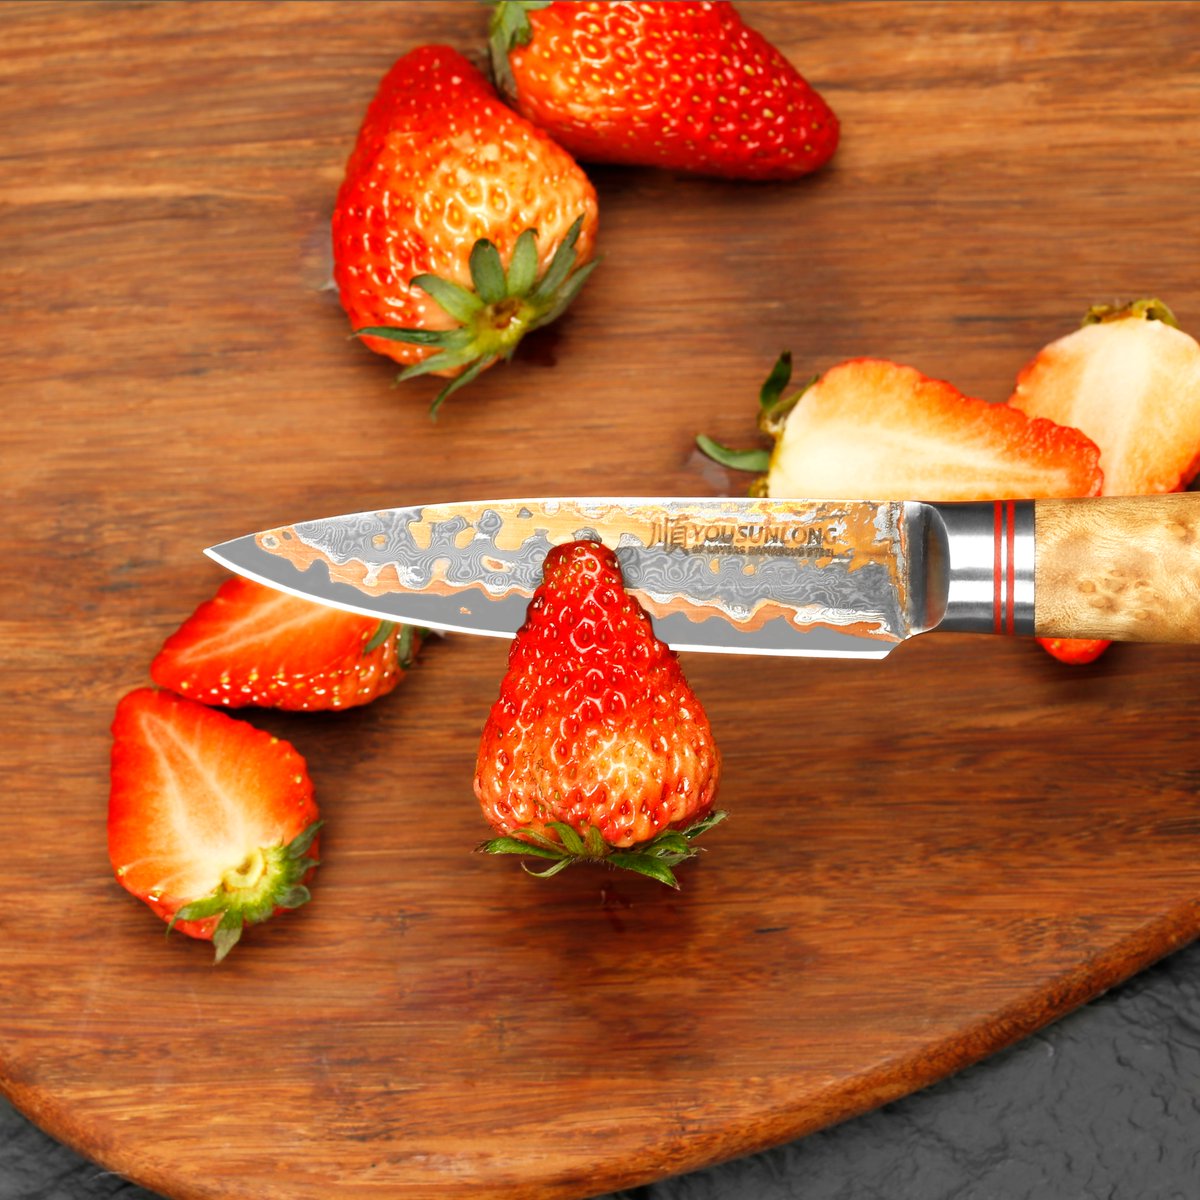 Perfect for precision peeling, slicing, and dicing.

🍓amzn.to/3TMVjKQ

#yousunlong #kitchenlove #foodprep #chefmode #kitchenstyle #cookinglife #foodblogger #kitchengoals #chefsofinstagram #foodielife #homechef #culinaryworld #foodinspiration #cookingtools #kitchenknife